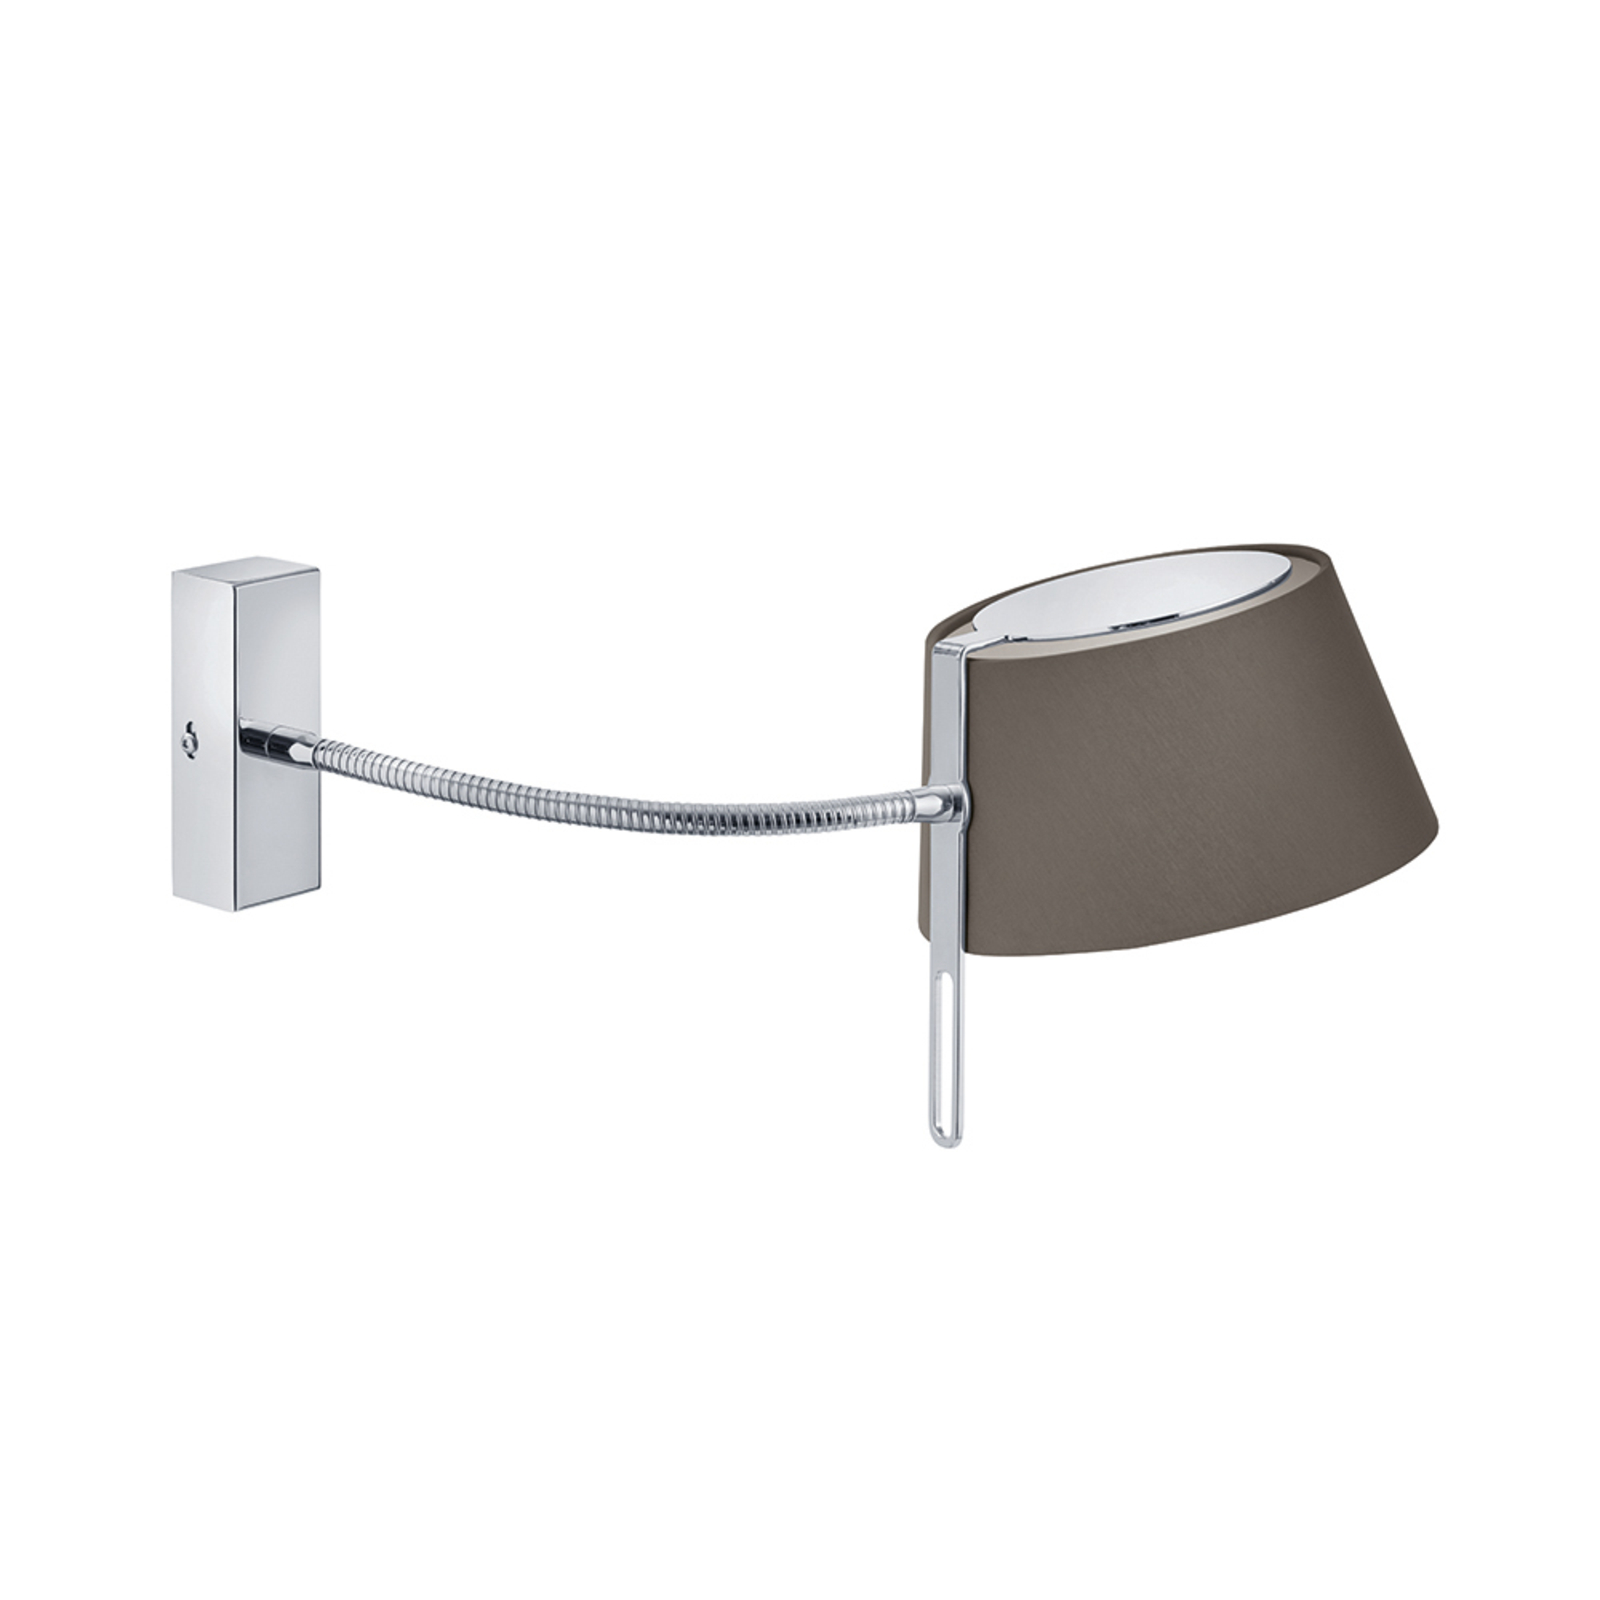 BRUMBERG 58132150 wall light with flexible arm